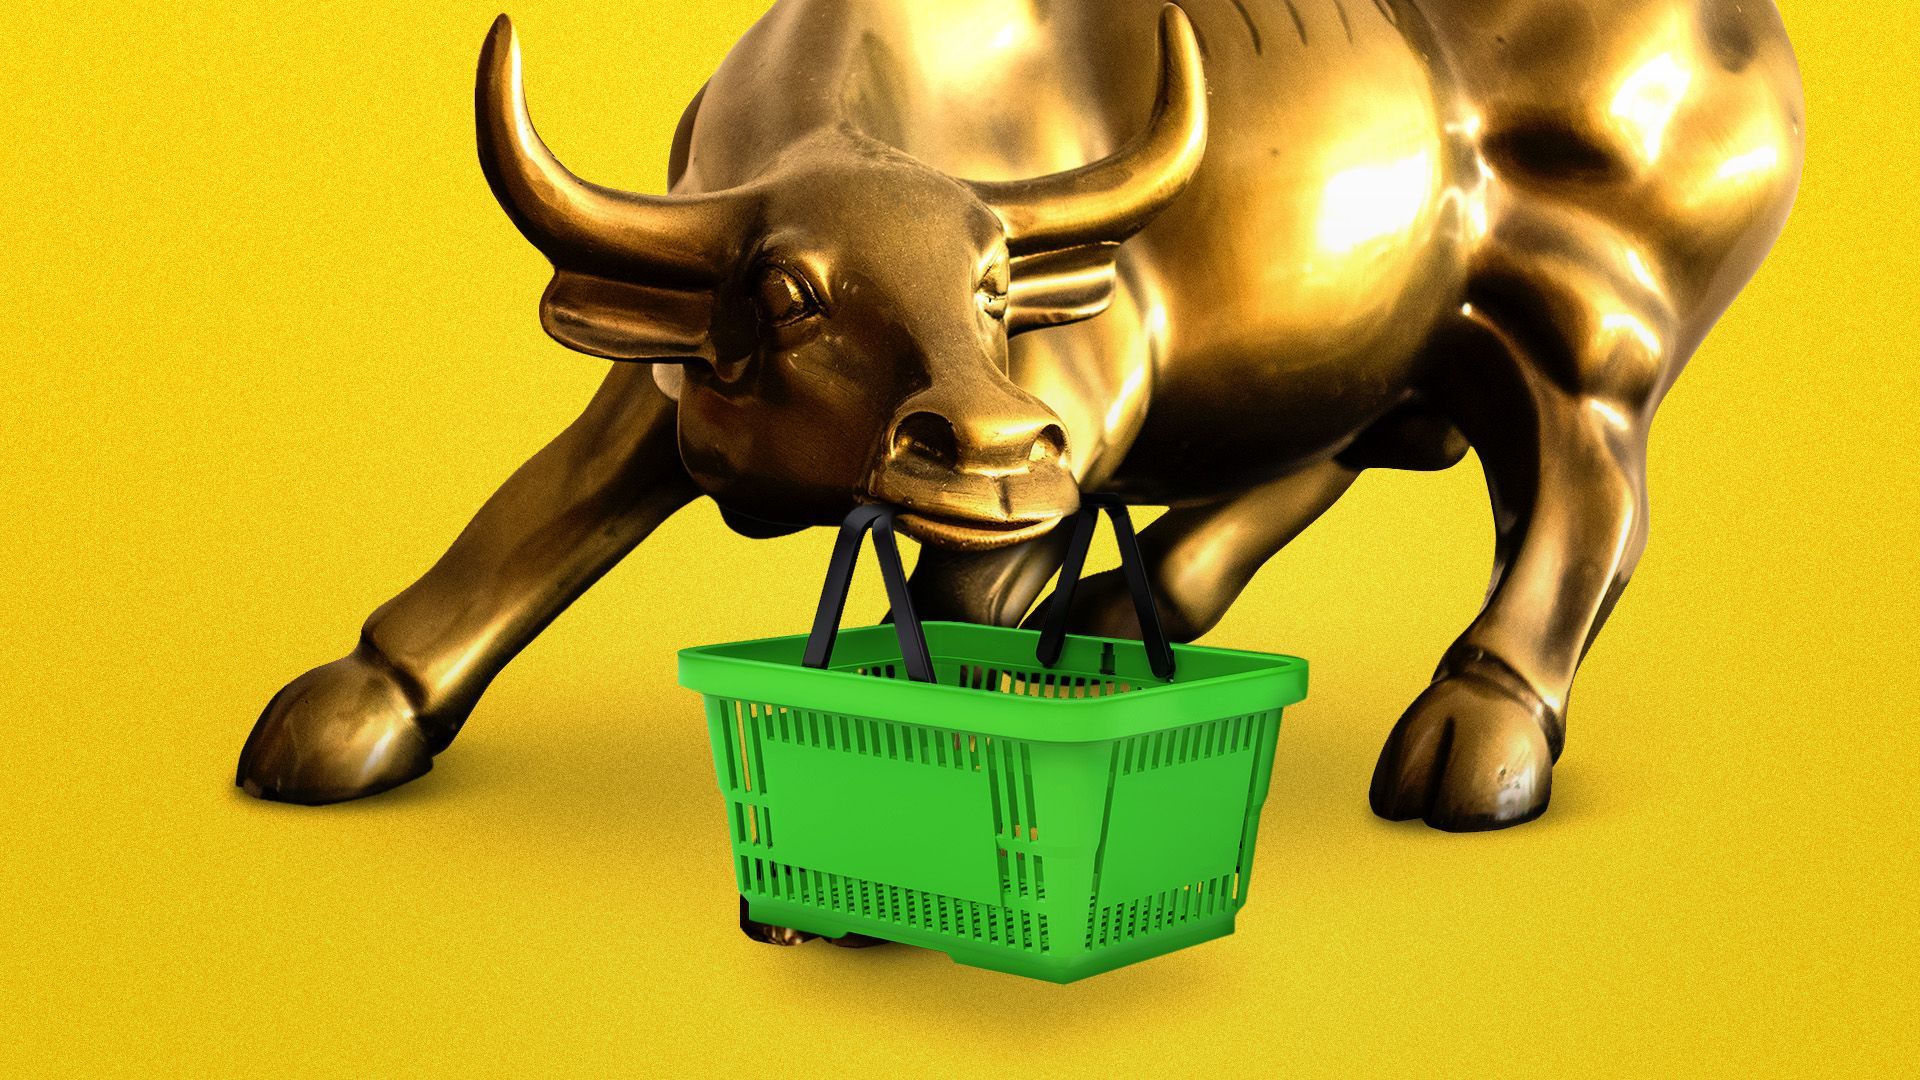 an illustration of the wall street bull holding a green shopping basket in its mouth